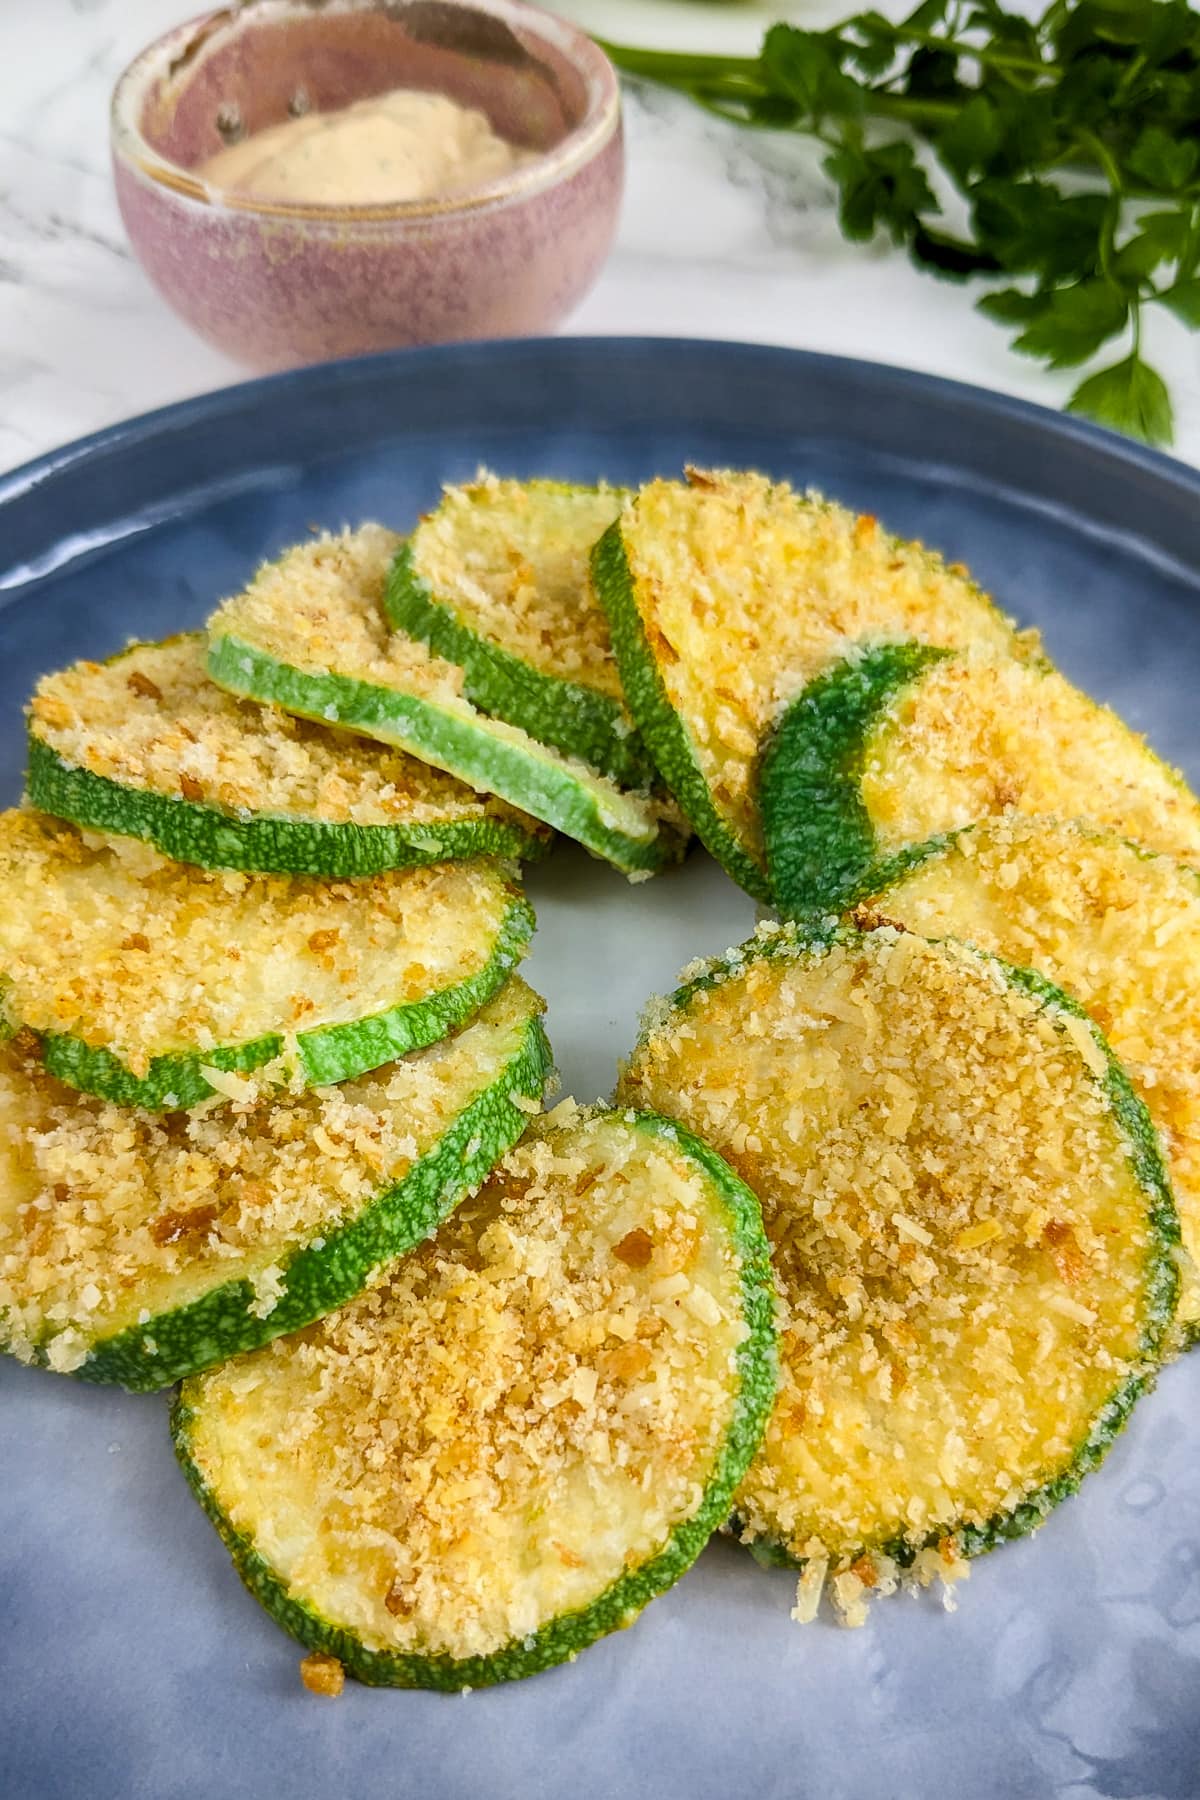 Elegantly served zucchini casserole slices on a blue plate.